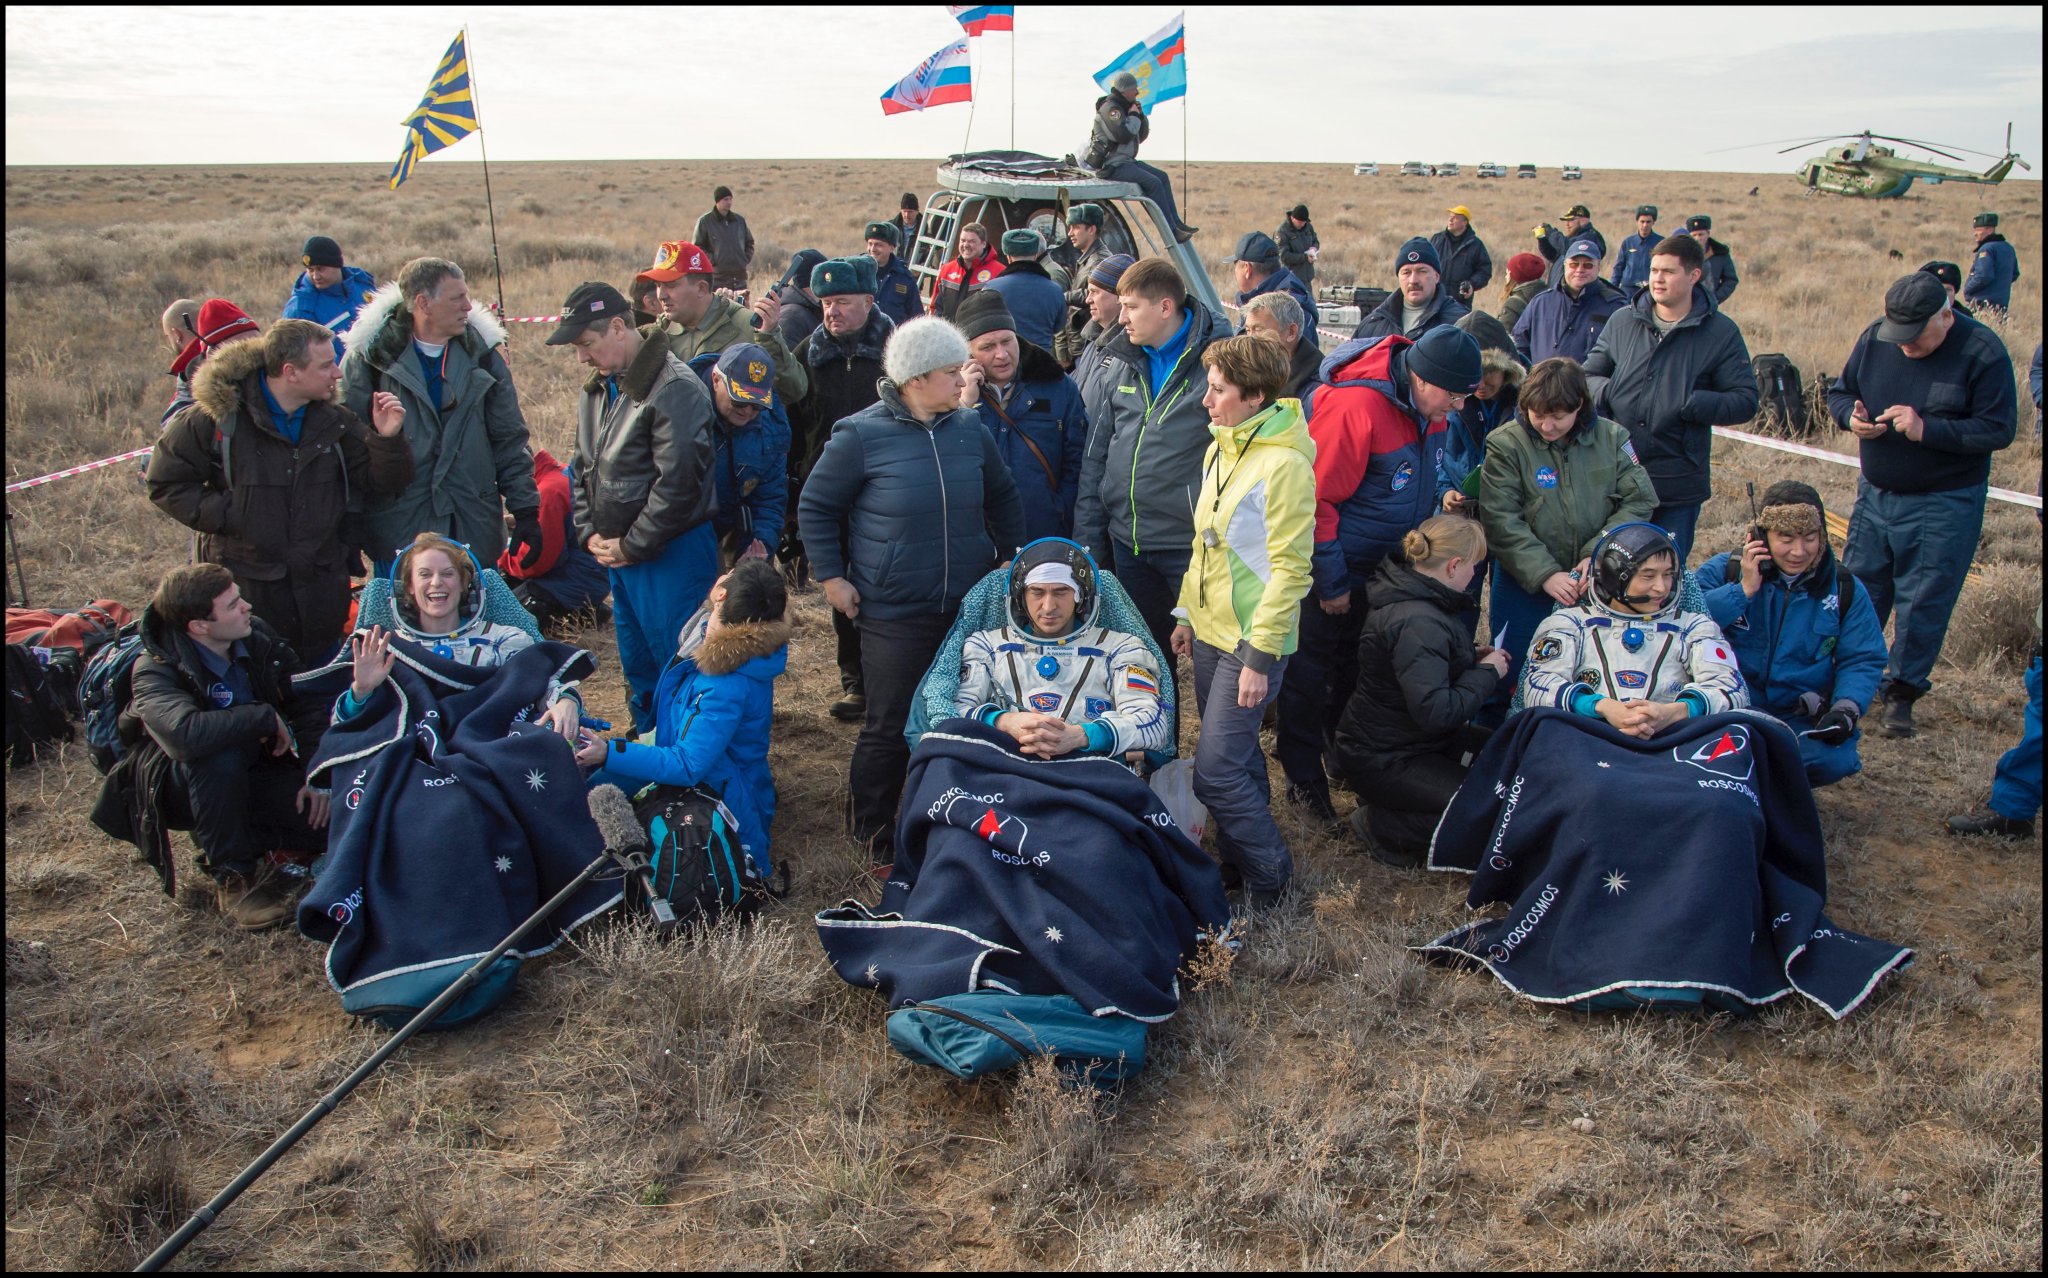 The Expedition 49 crew re-adjust to terrestrial gravity and the sights, sounds and scents of Earth, after landing in Kazakhstan. From left are Kate Rubins, Anatoli Ivanishin and Takuya Onishi. Photo Credit: NASA